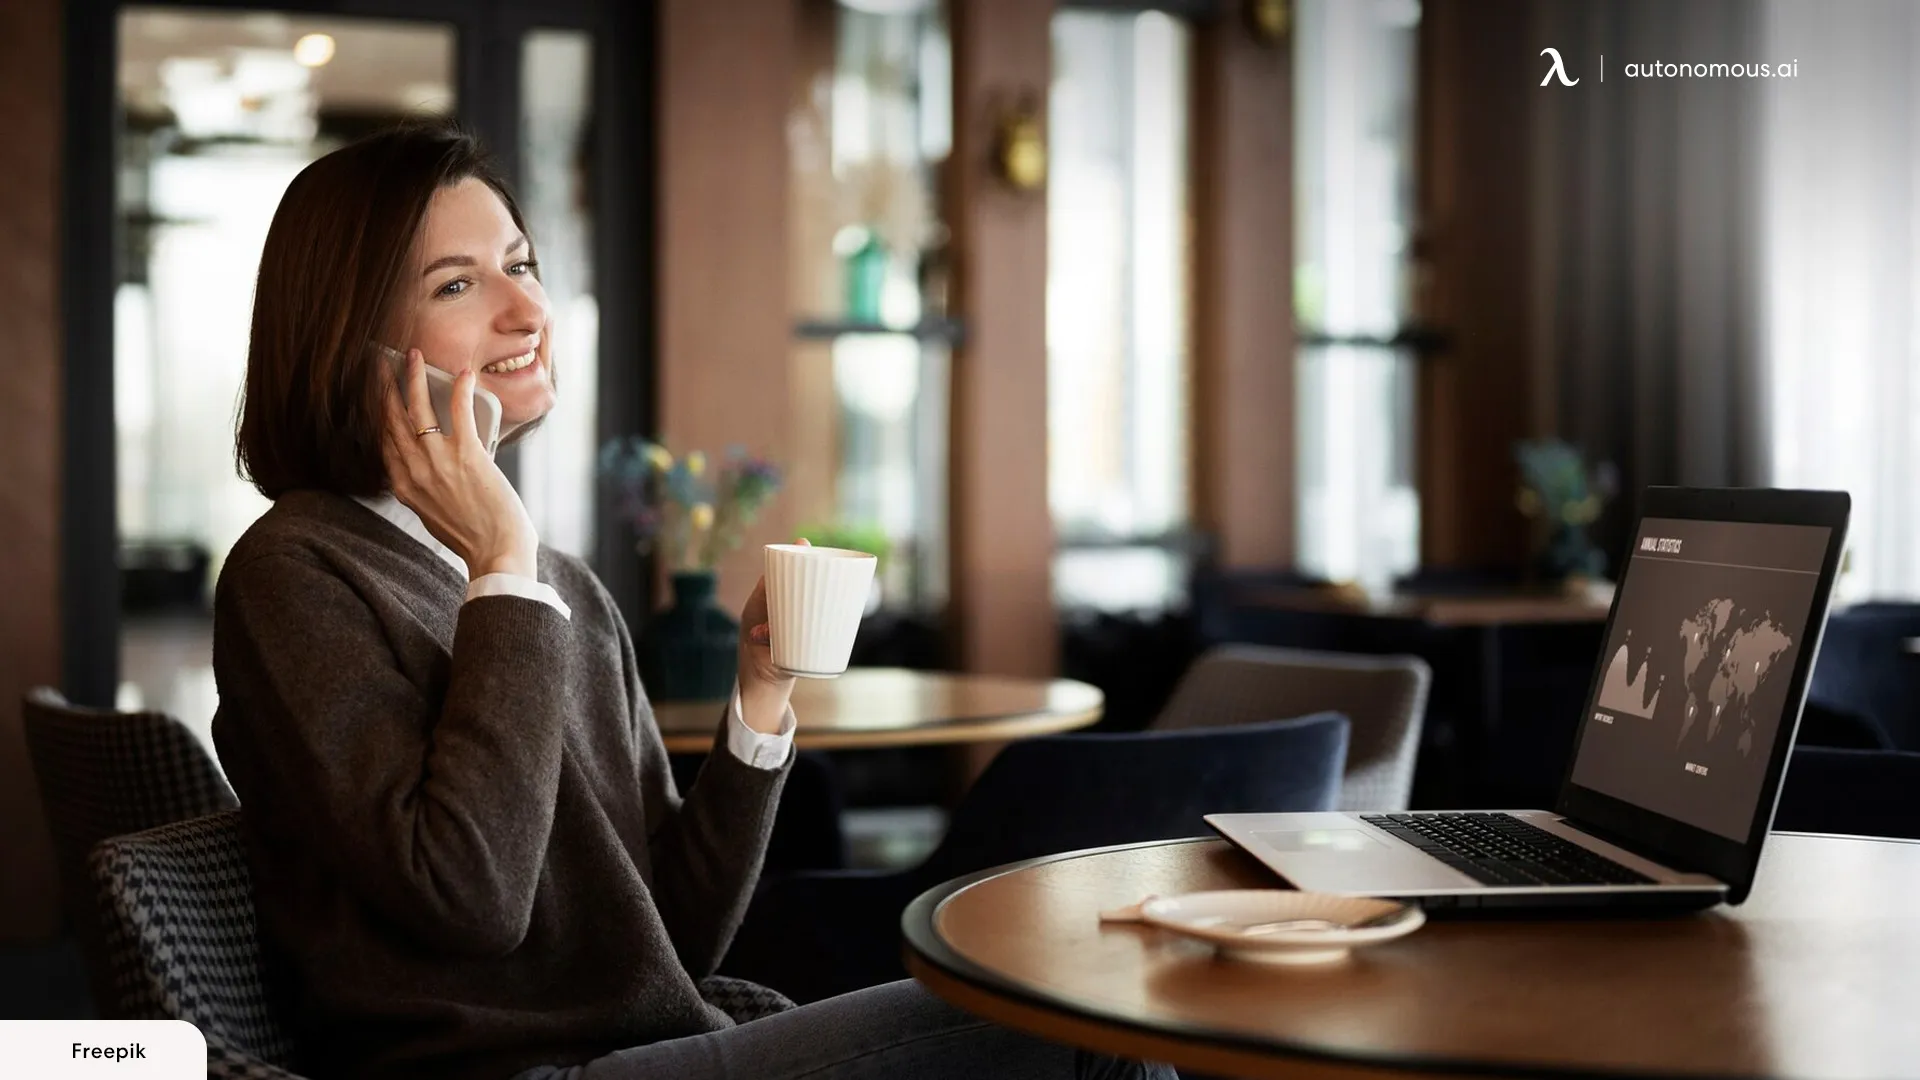 Coffee Shops: The New Remote Workplace